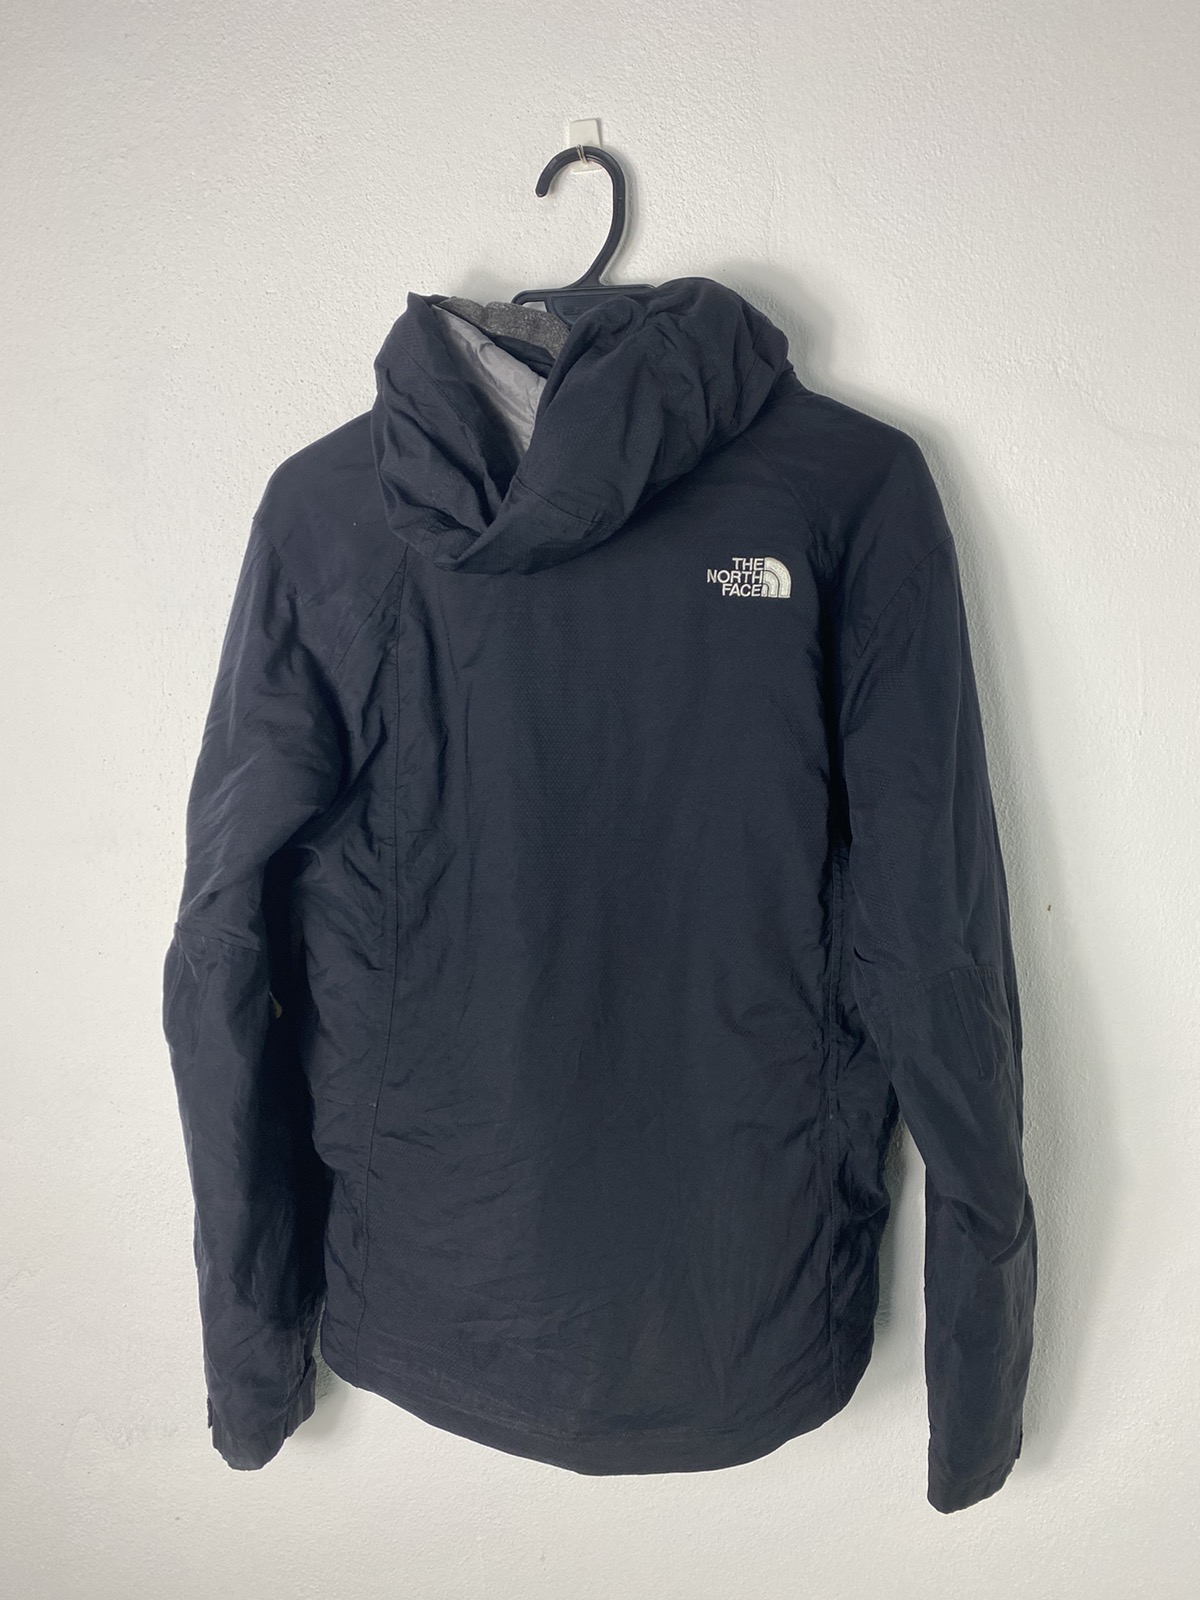 The North Face Hyvent Multipocket Jacket - 3